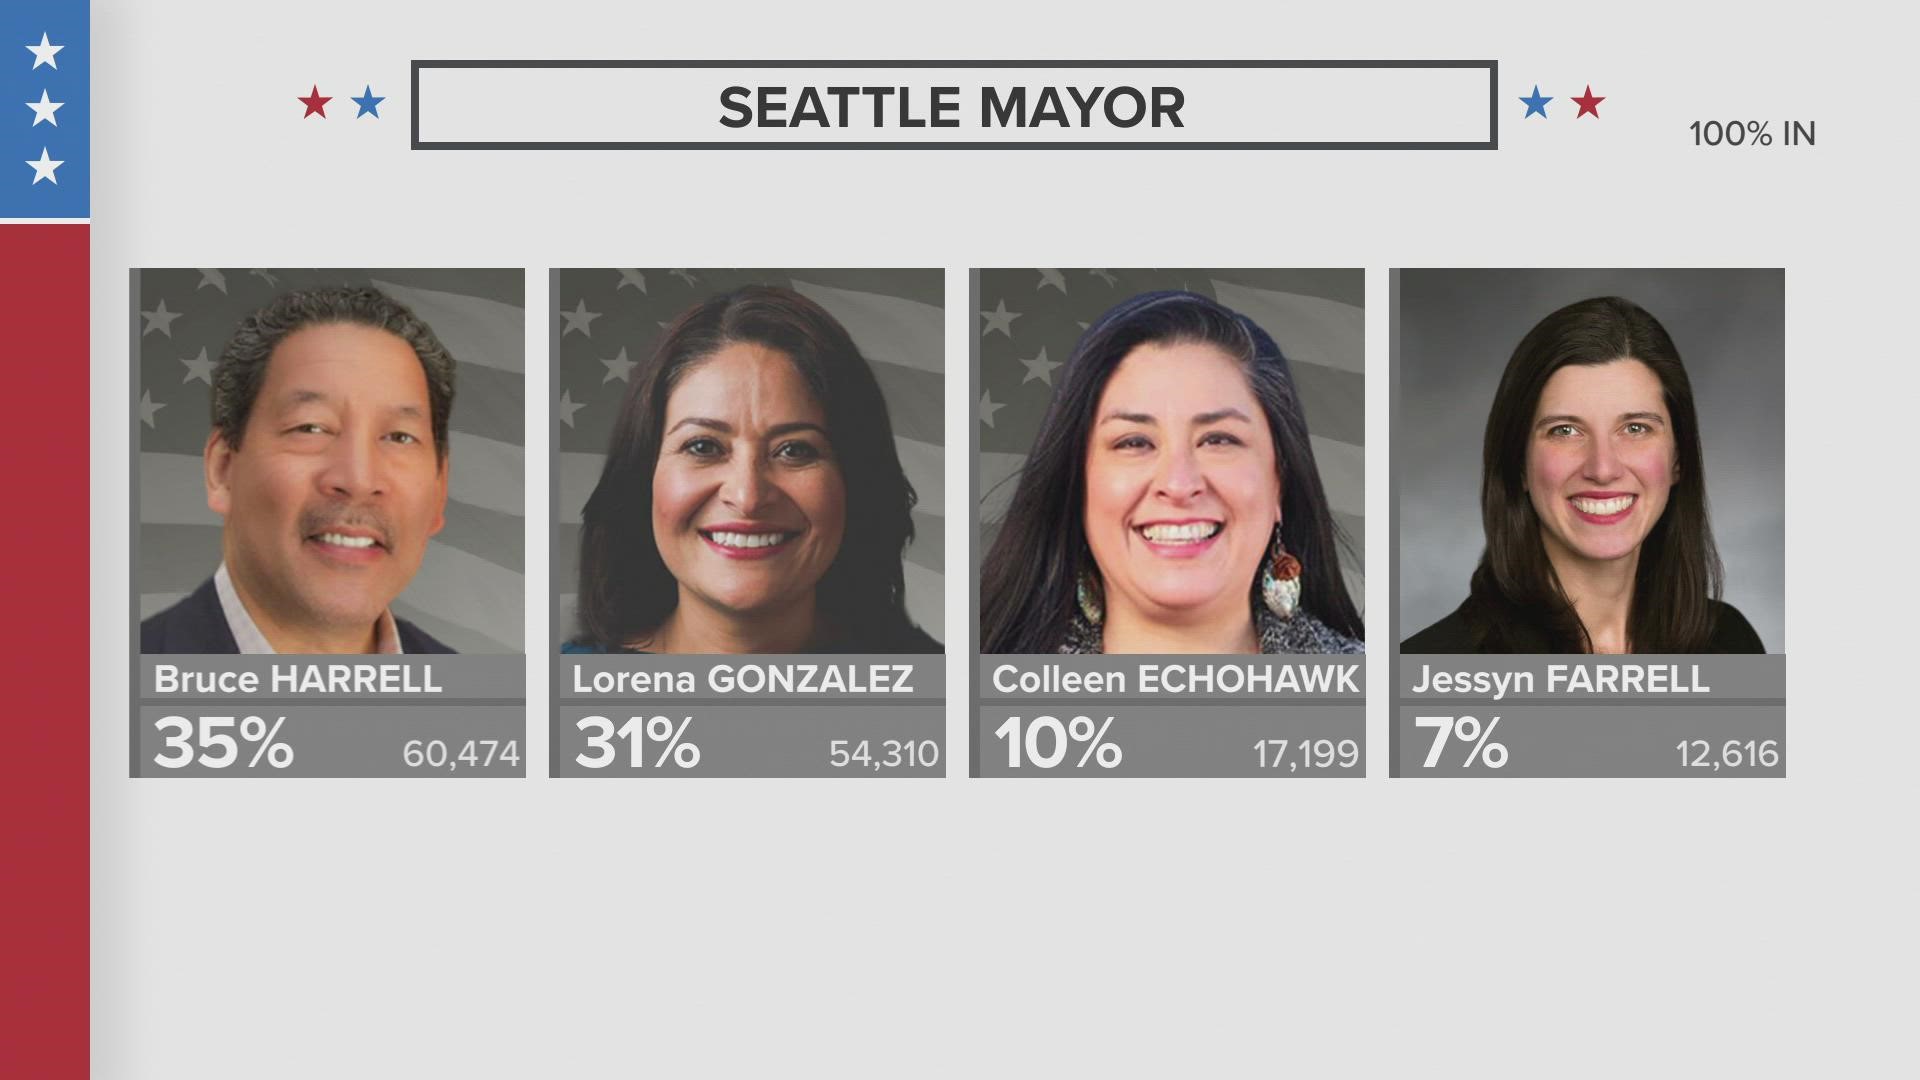 Current Seattle City Council President Lorena González is following closely behind with 31% of the vote.